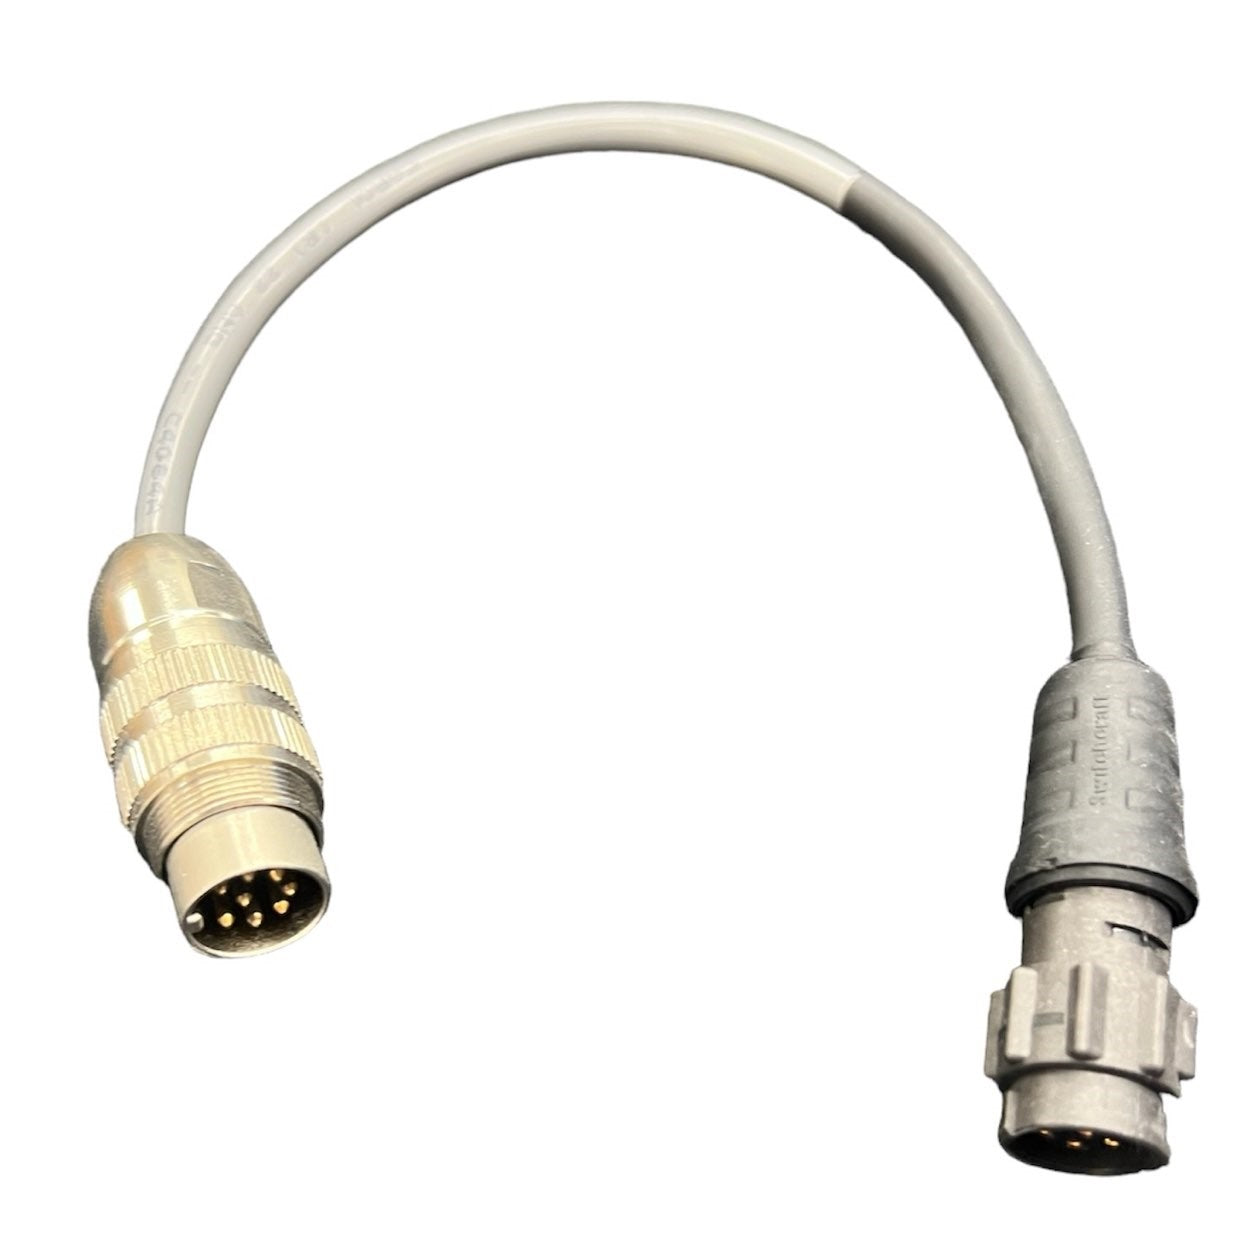 Spectracoat Adapter Cable for Wagner controllers